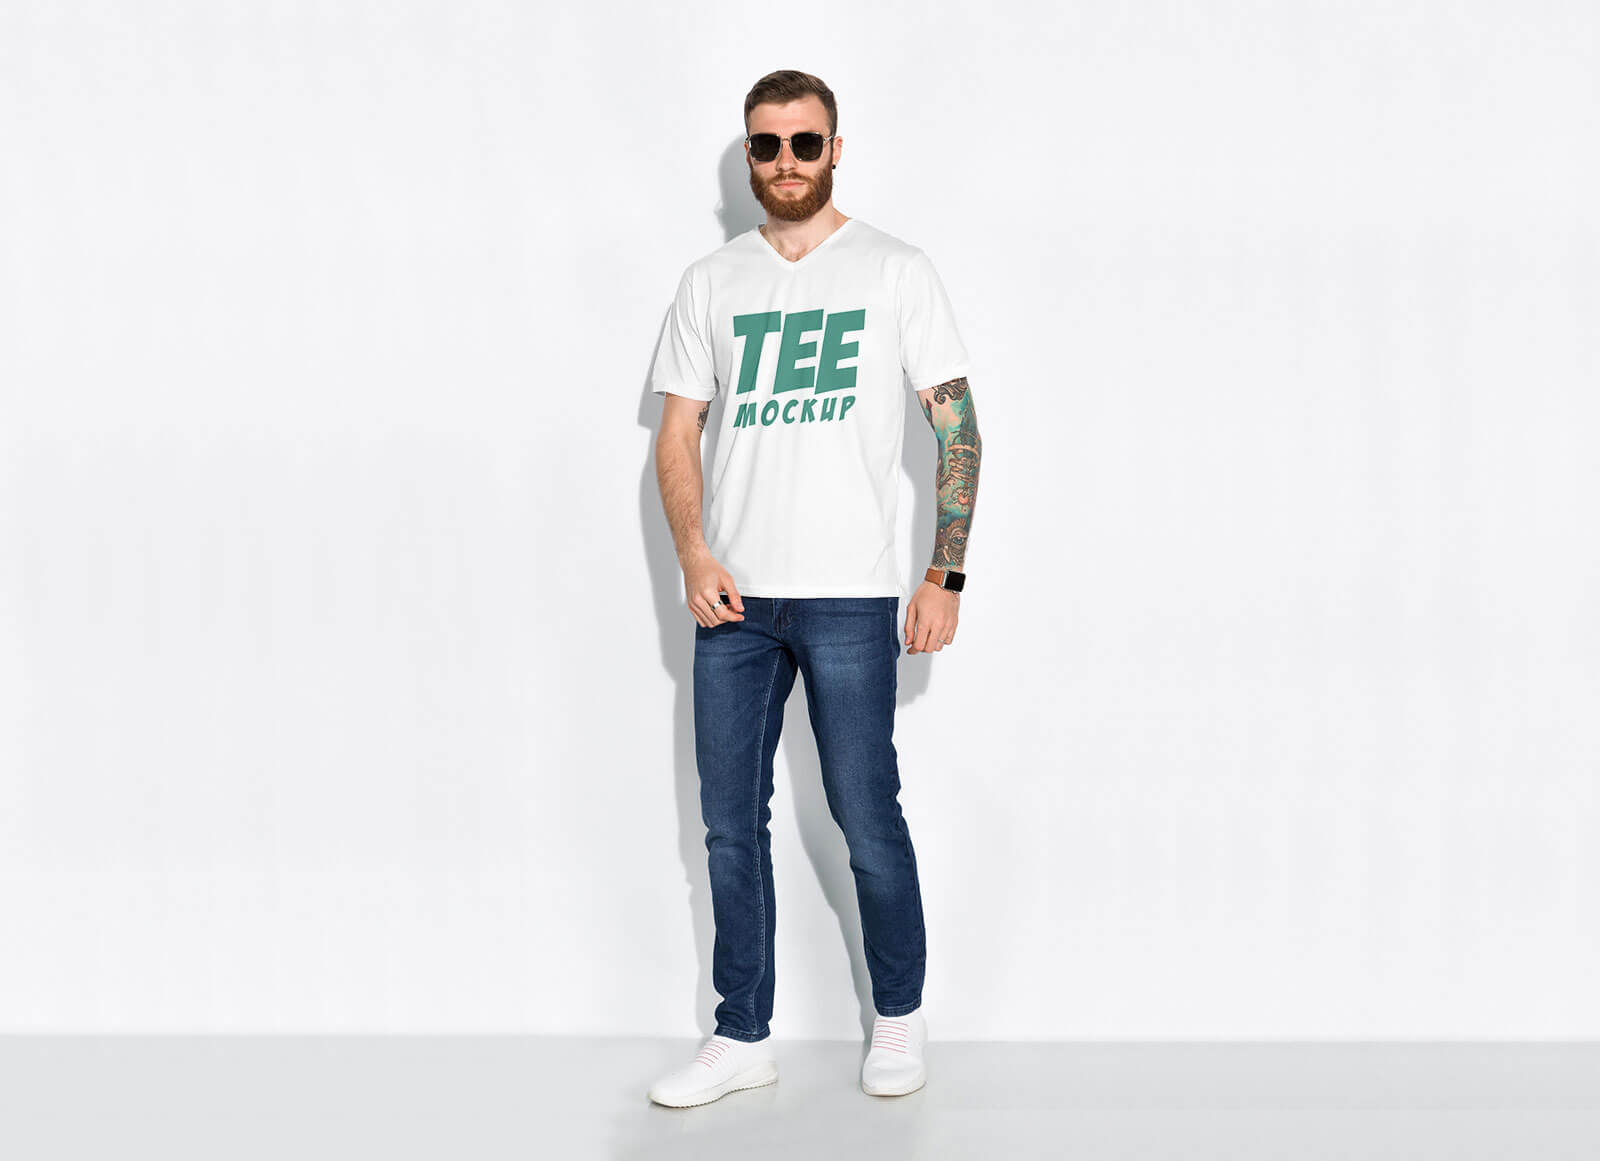 Men?s T-Shirt Mockup for Graphic Tees